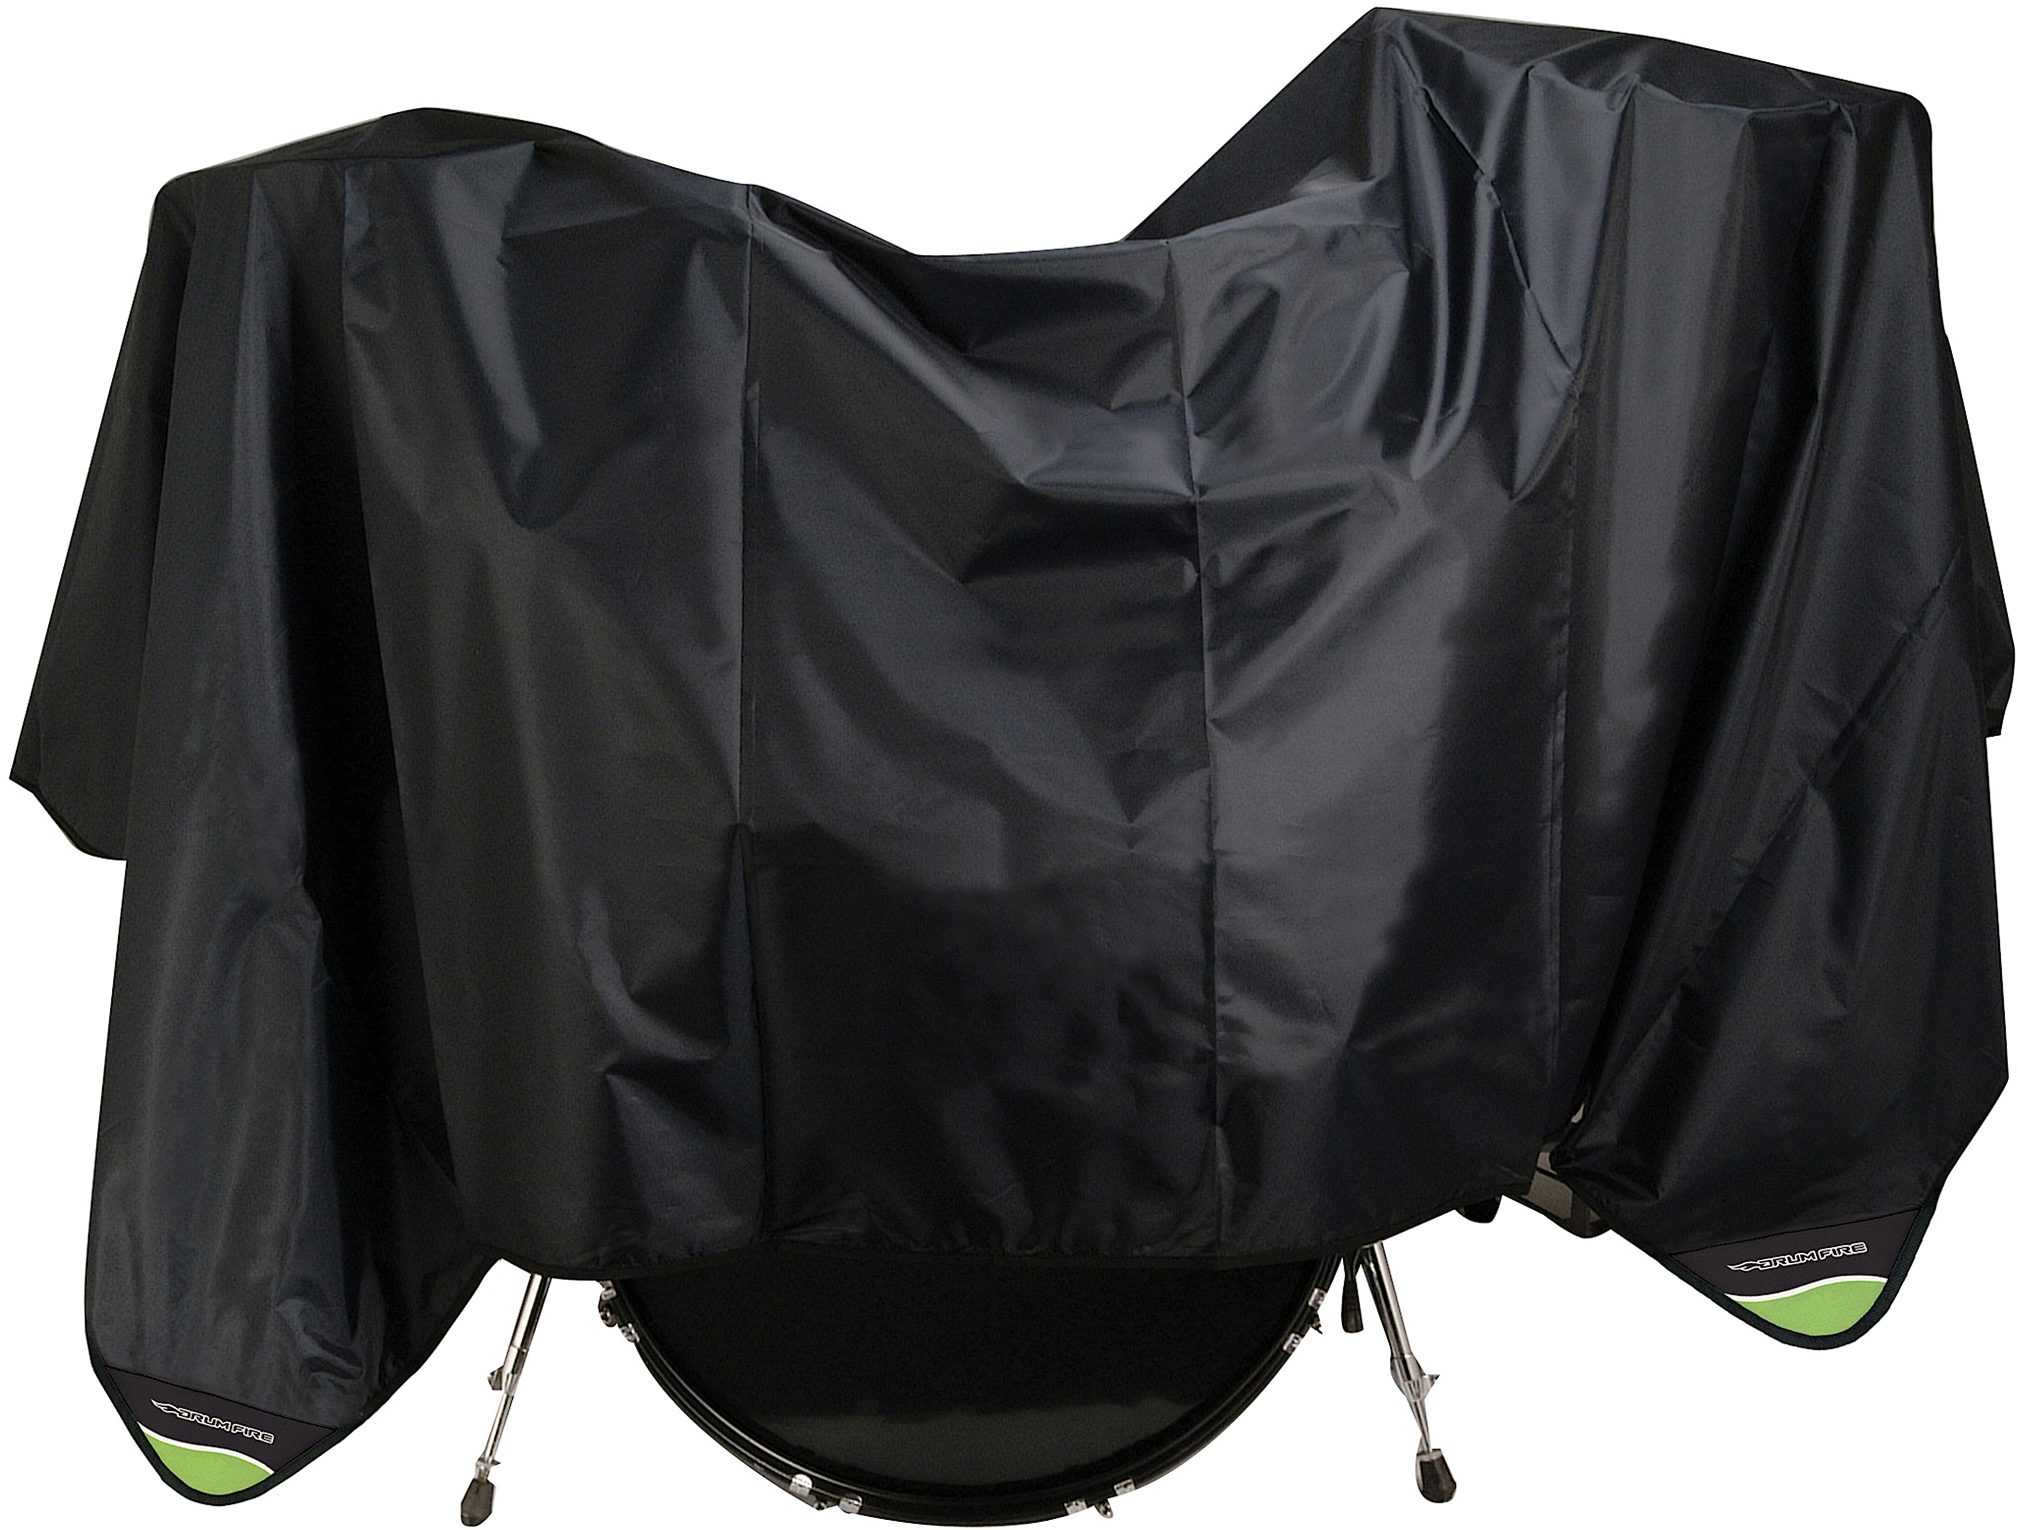 on-stage drumfire dta1088 drum set dust cover